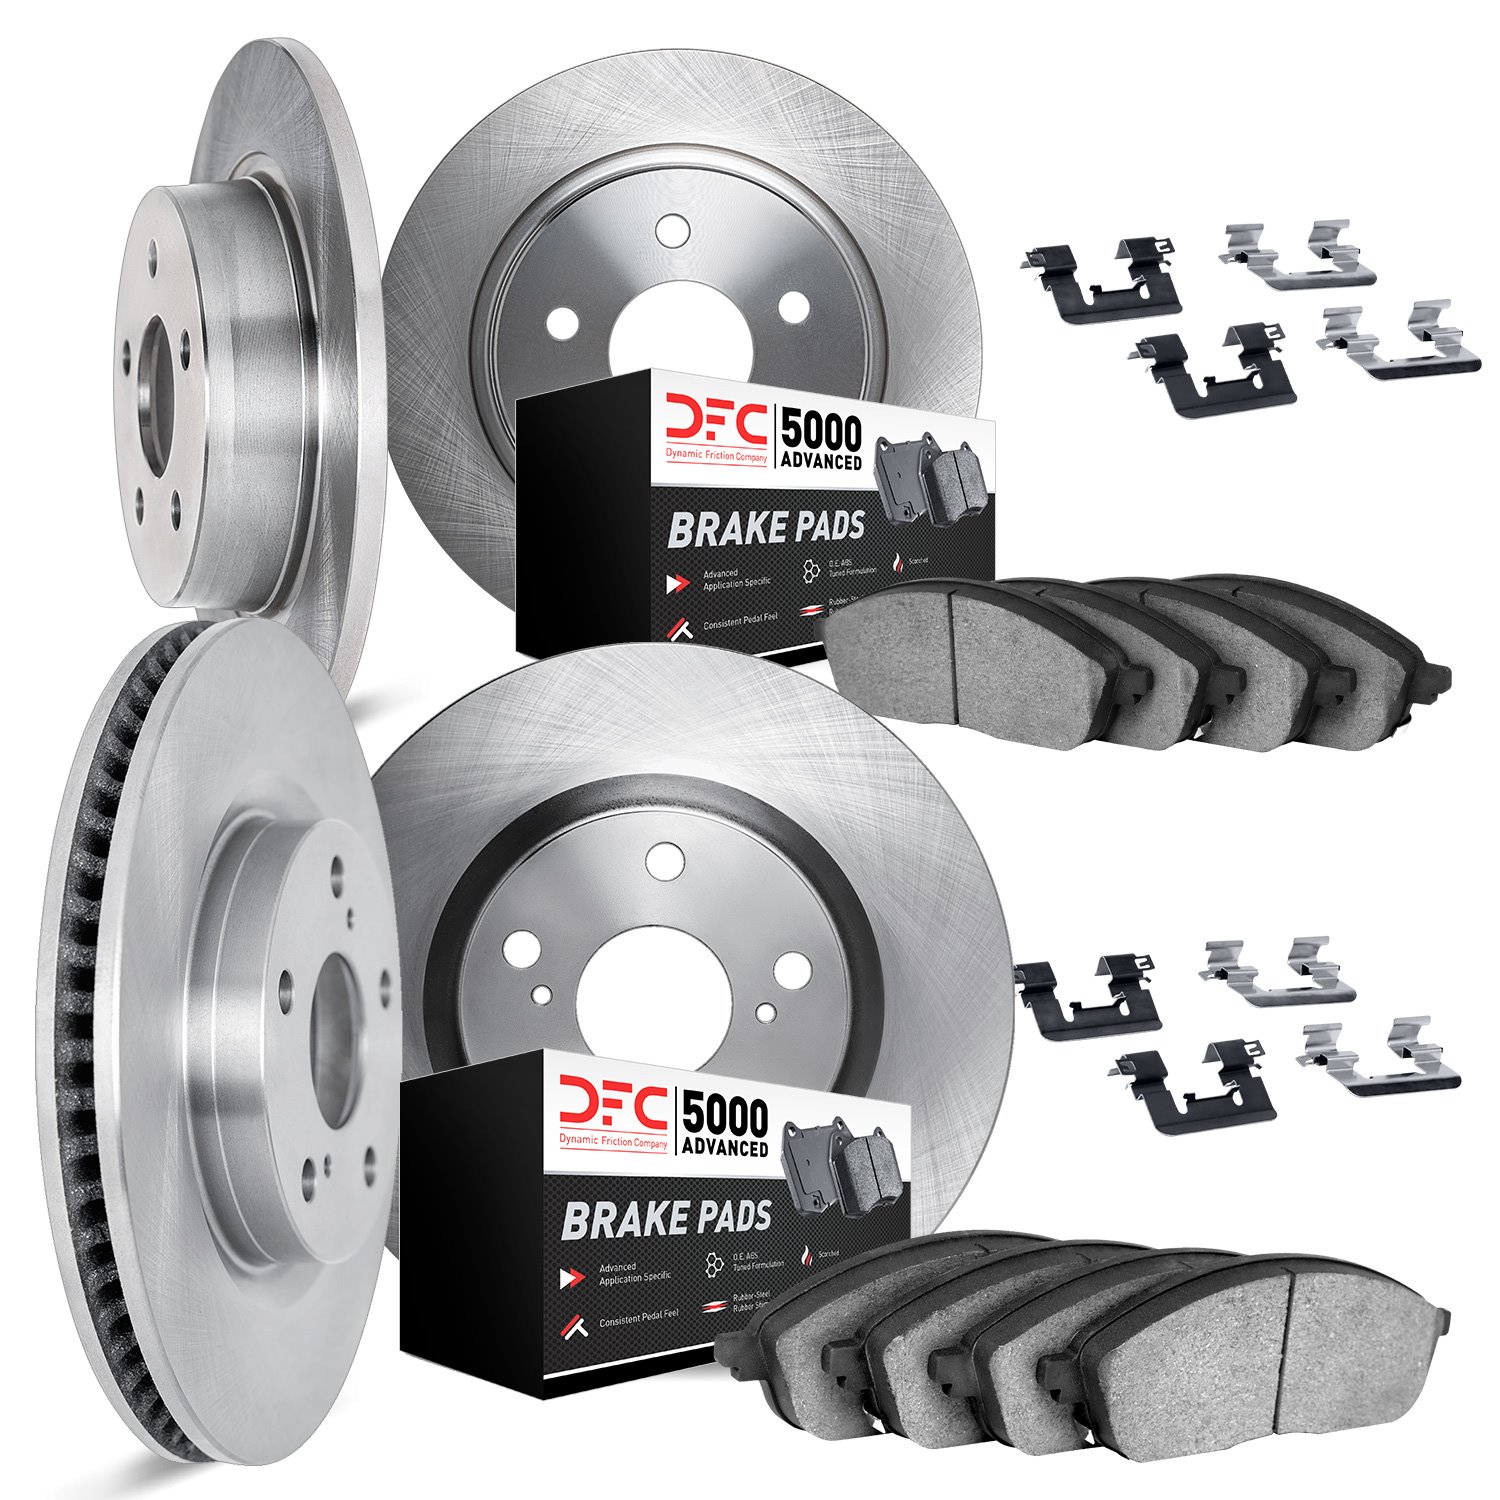 6514-76068 Brake Rotors w/5000 Advanced Brake Pads Kit with Hardware, 2018-2018 Lexus/Toyota/Scion, Position: Front and Rear